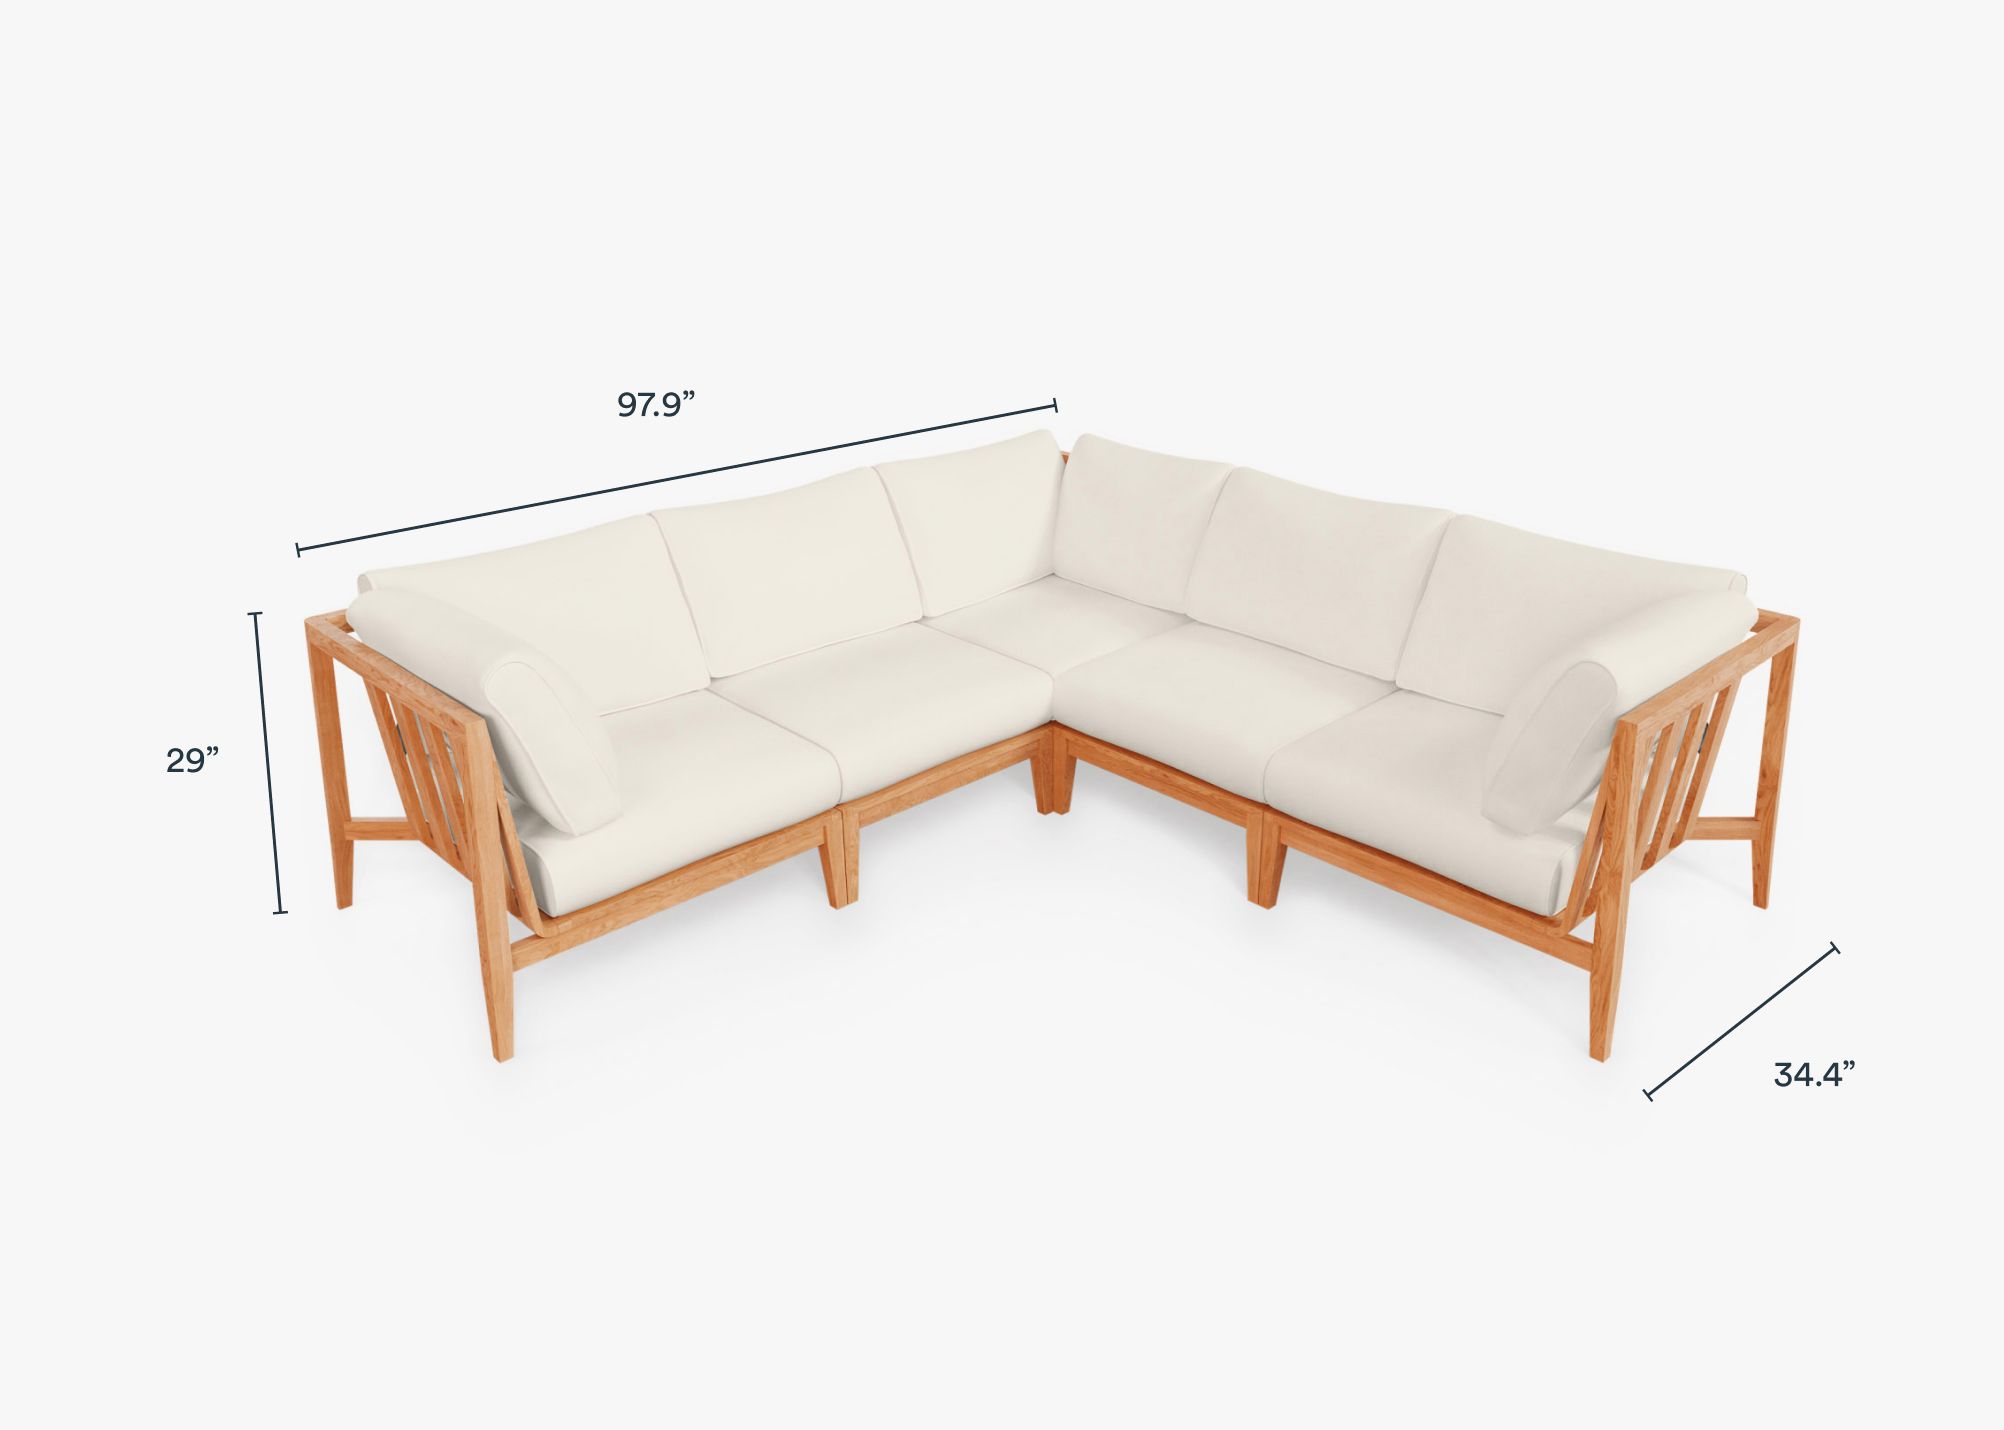 Teak Outdoor Corner Sectional - 5 Seat dimensions in inches, also listed under Dimensions and Weights.